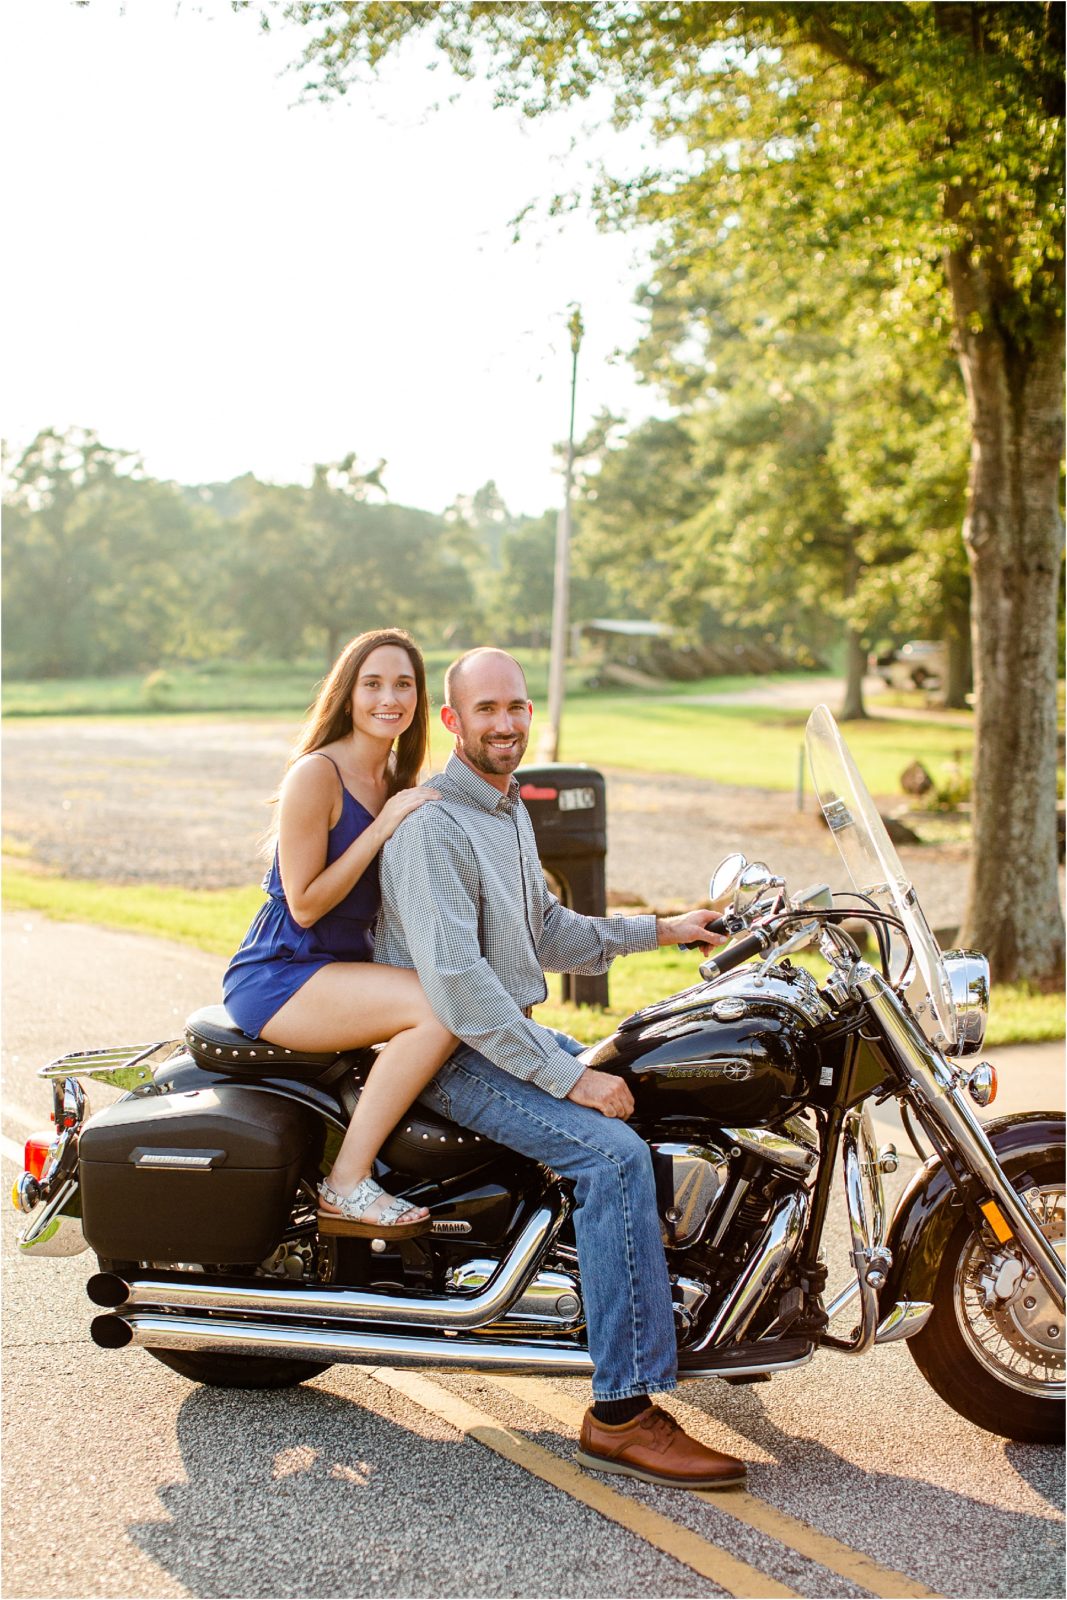 Couple on motorcycle in Anderson SC